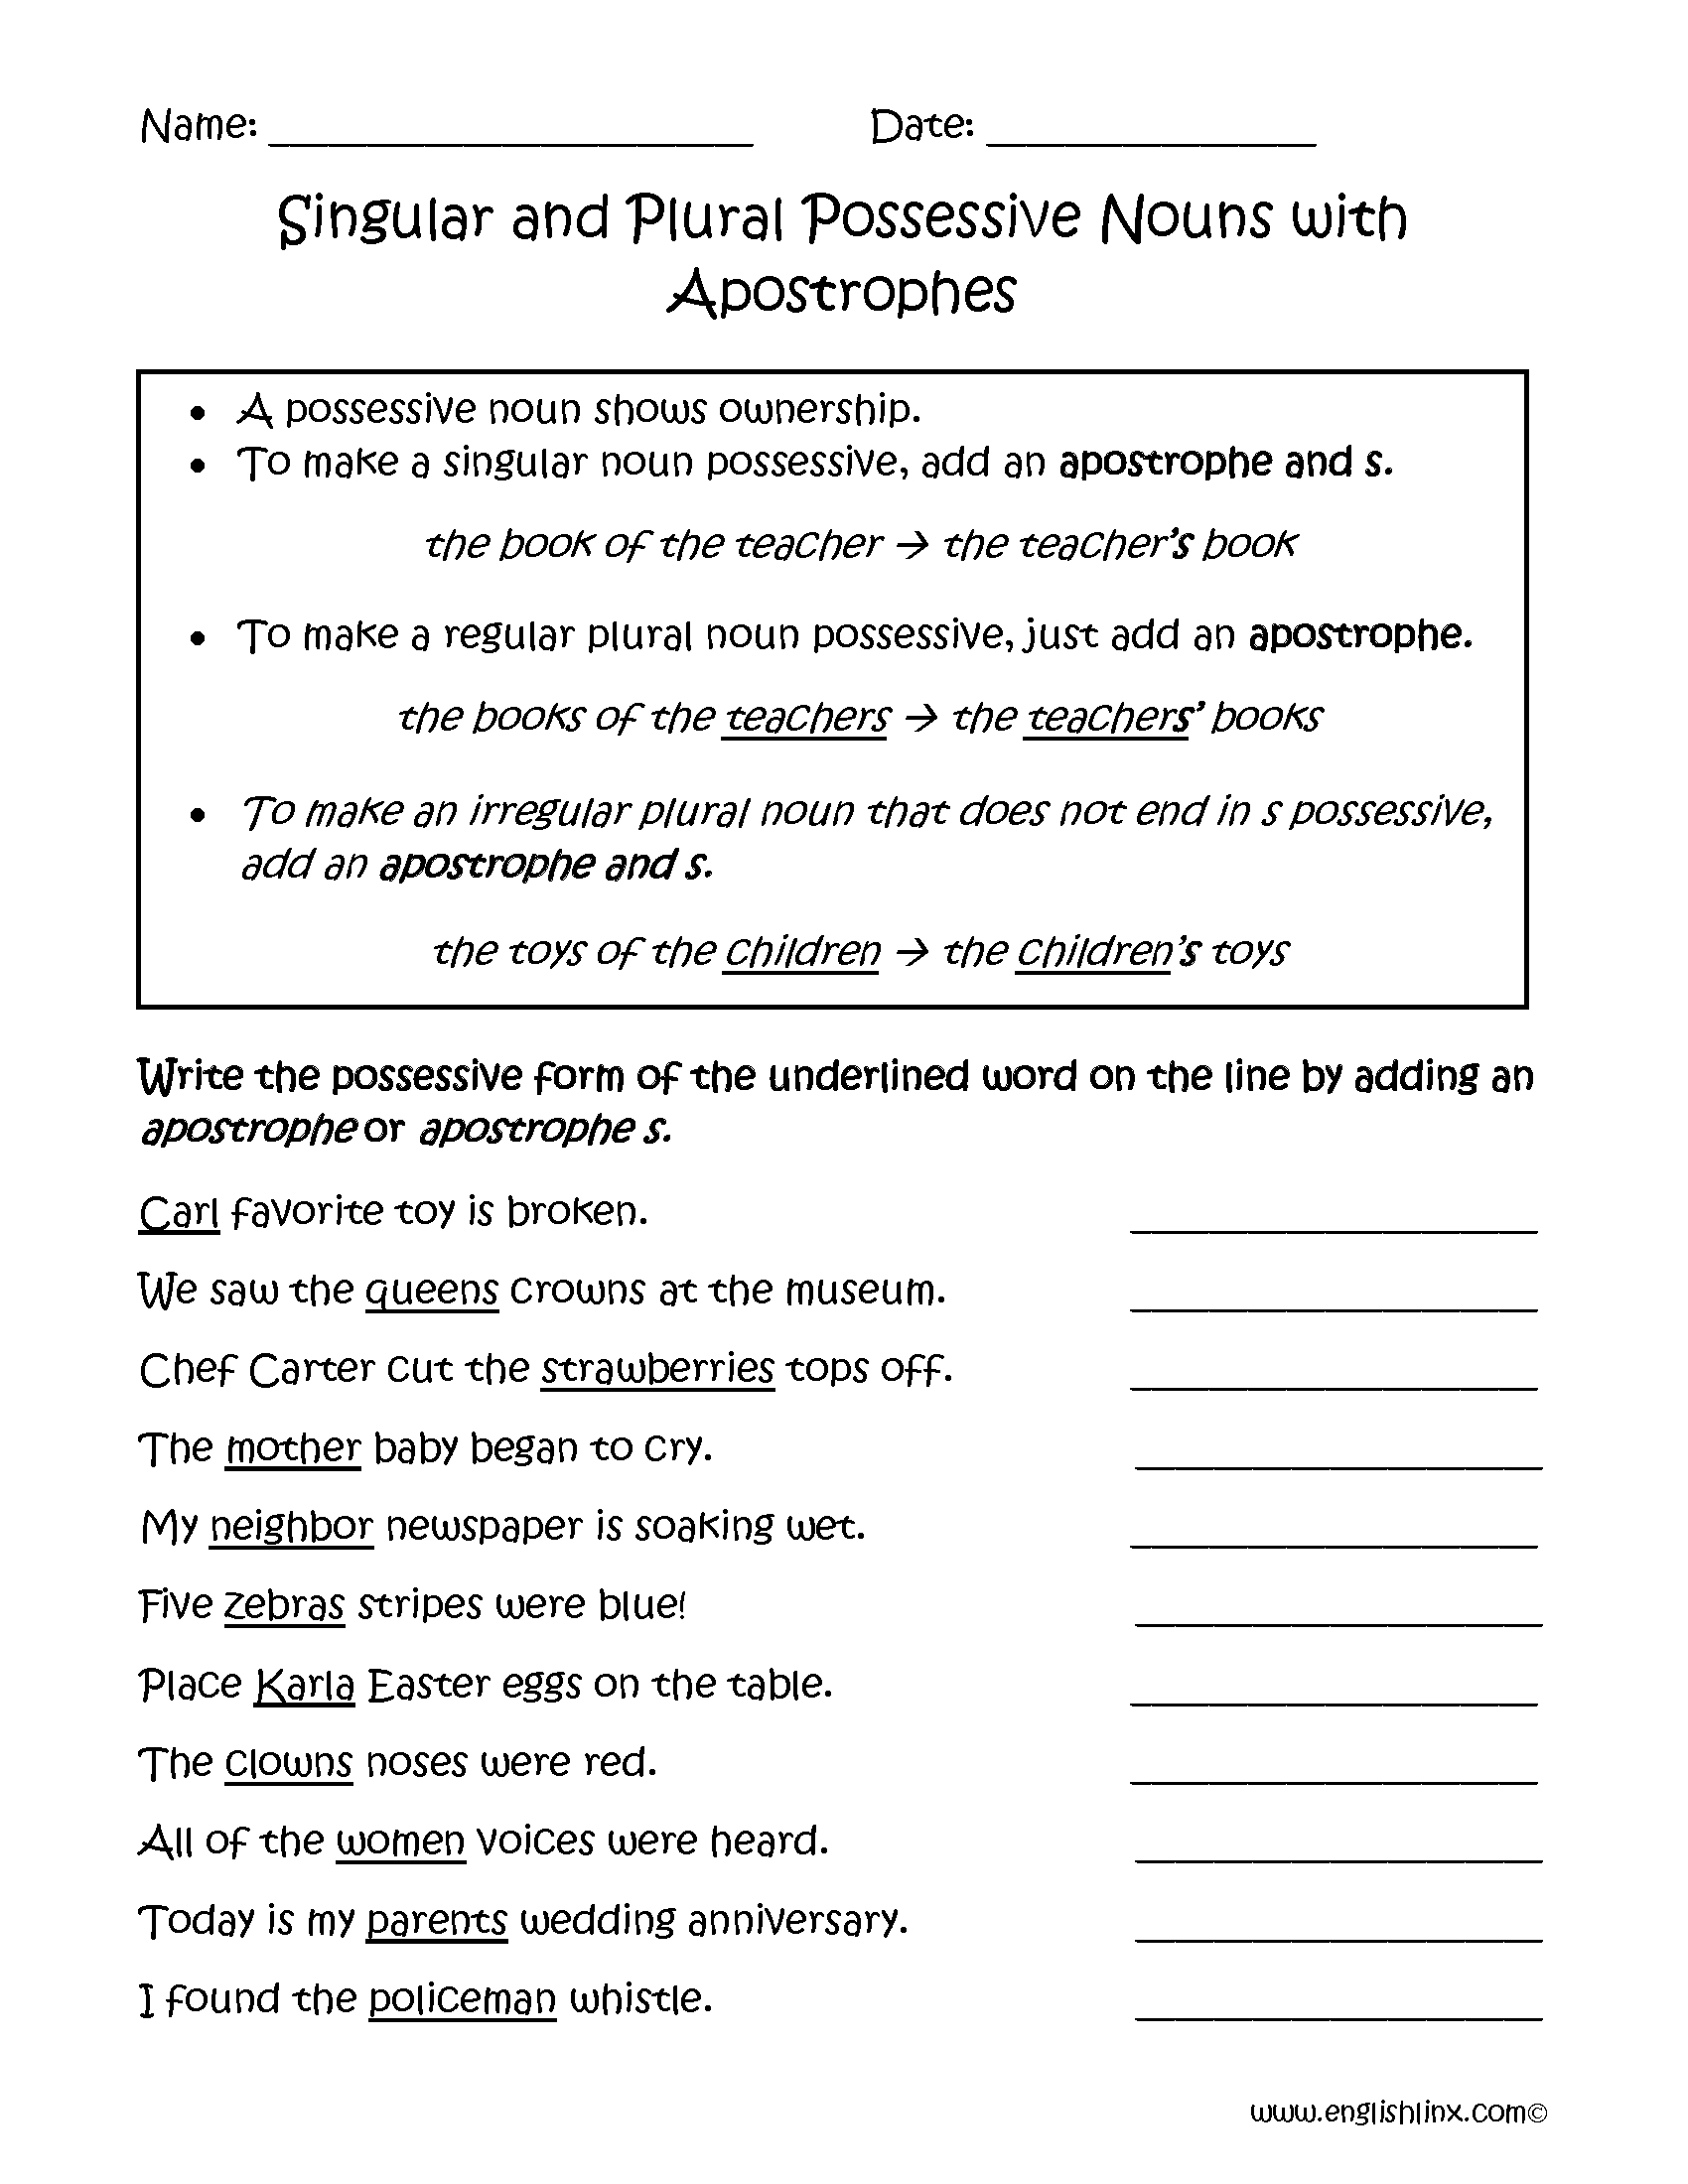 Singular And Plural Possessive Nouns With Apostrophes Worksheets | Possessive Nouns Printable Worksheets